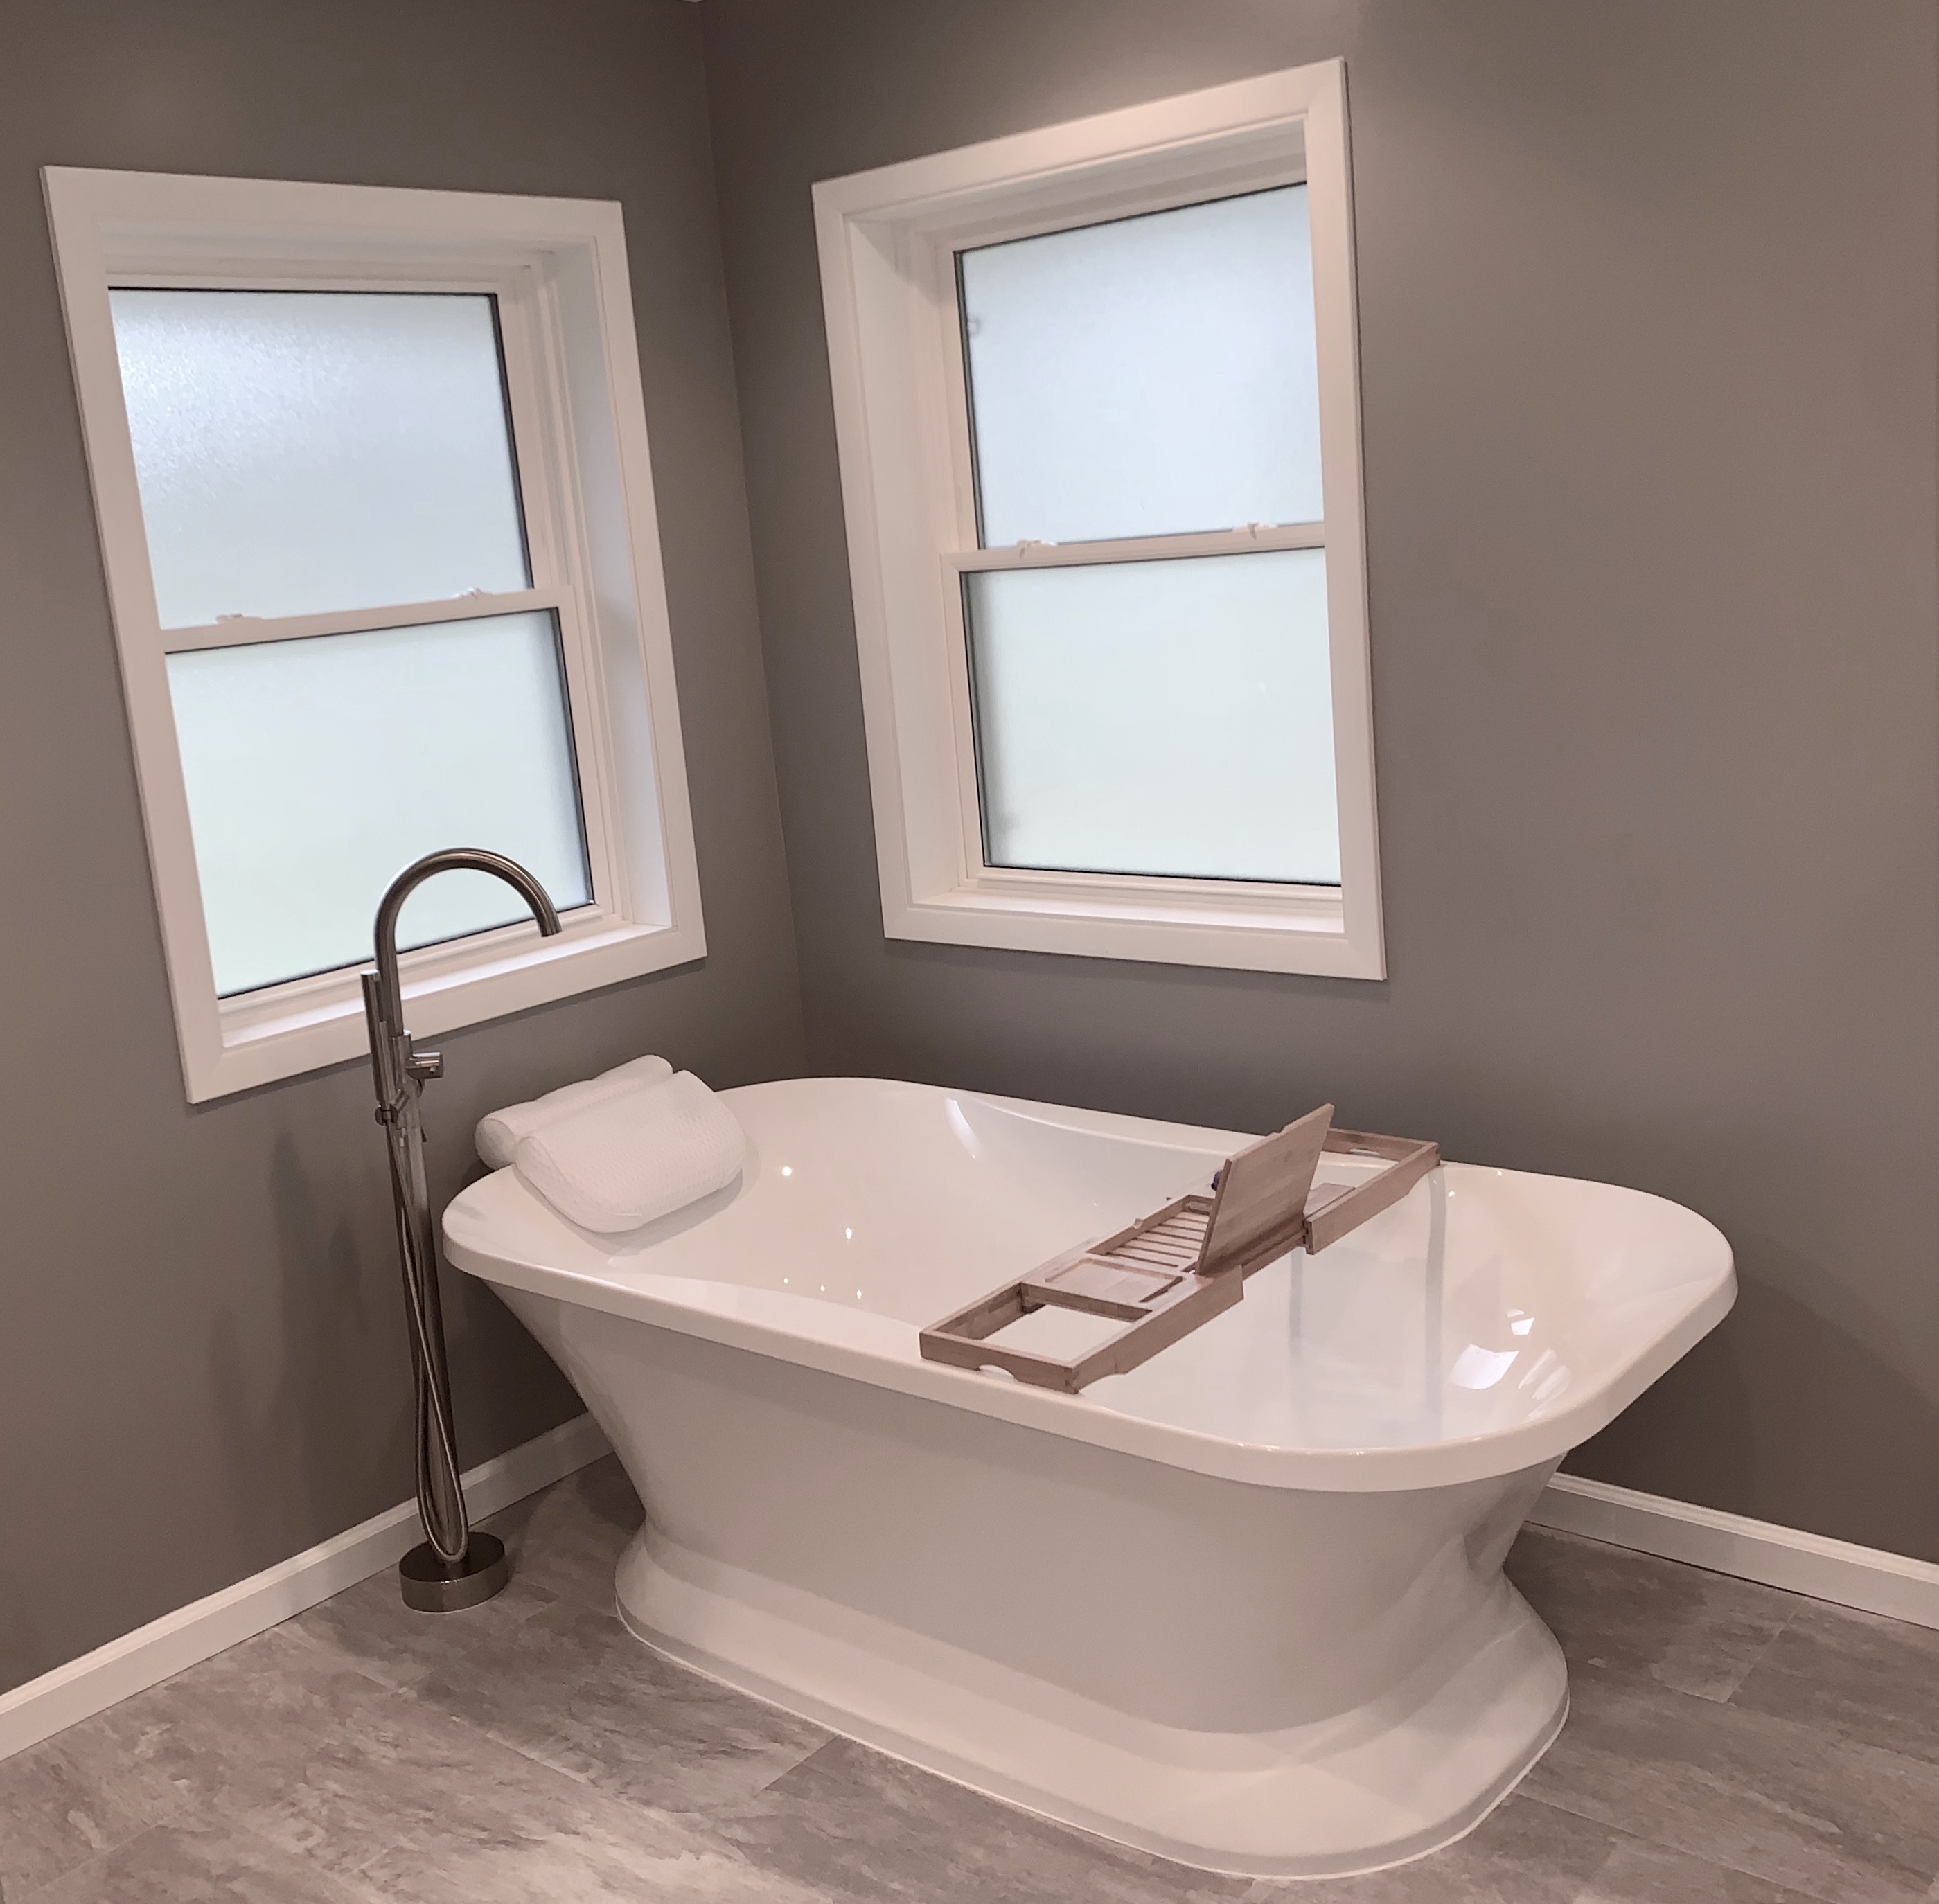 Custom Master Bathroom Remodel with Freestanding Tub and Walk-in Shower